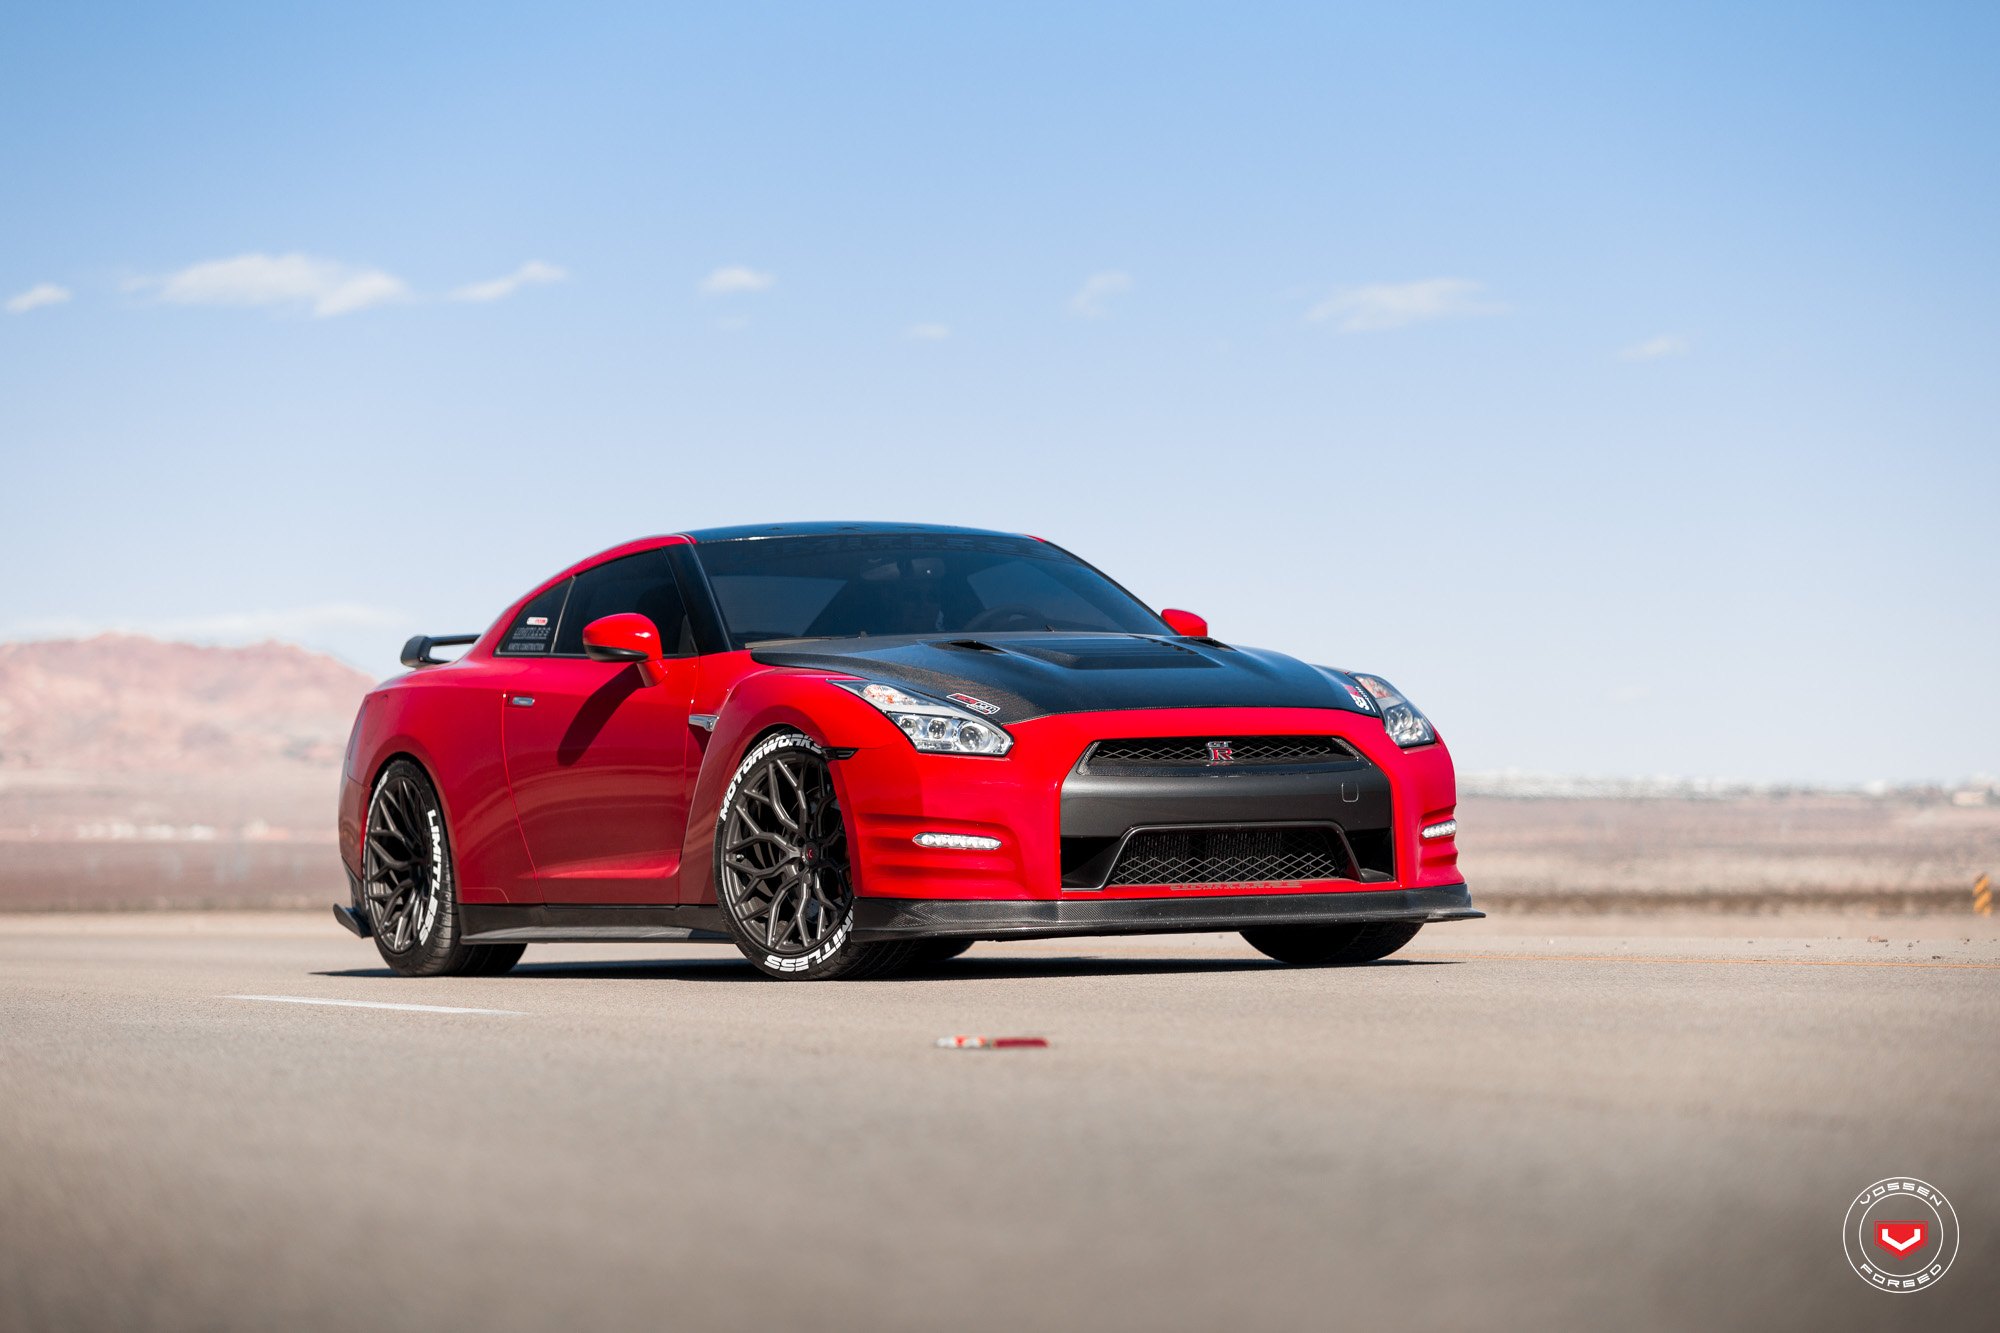 Carbon Fiber Vented Hood on Red Nissan GT-R - Photo by Vossen